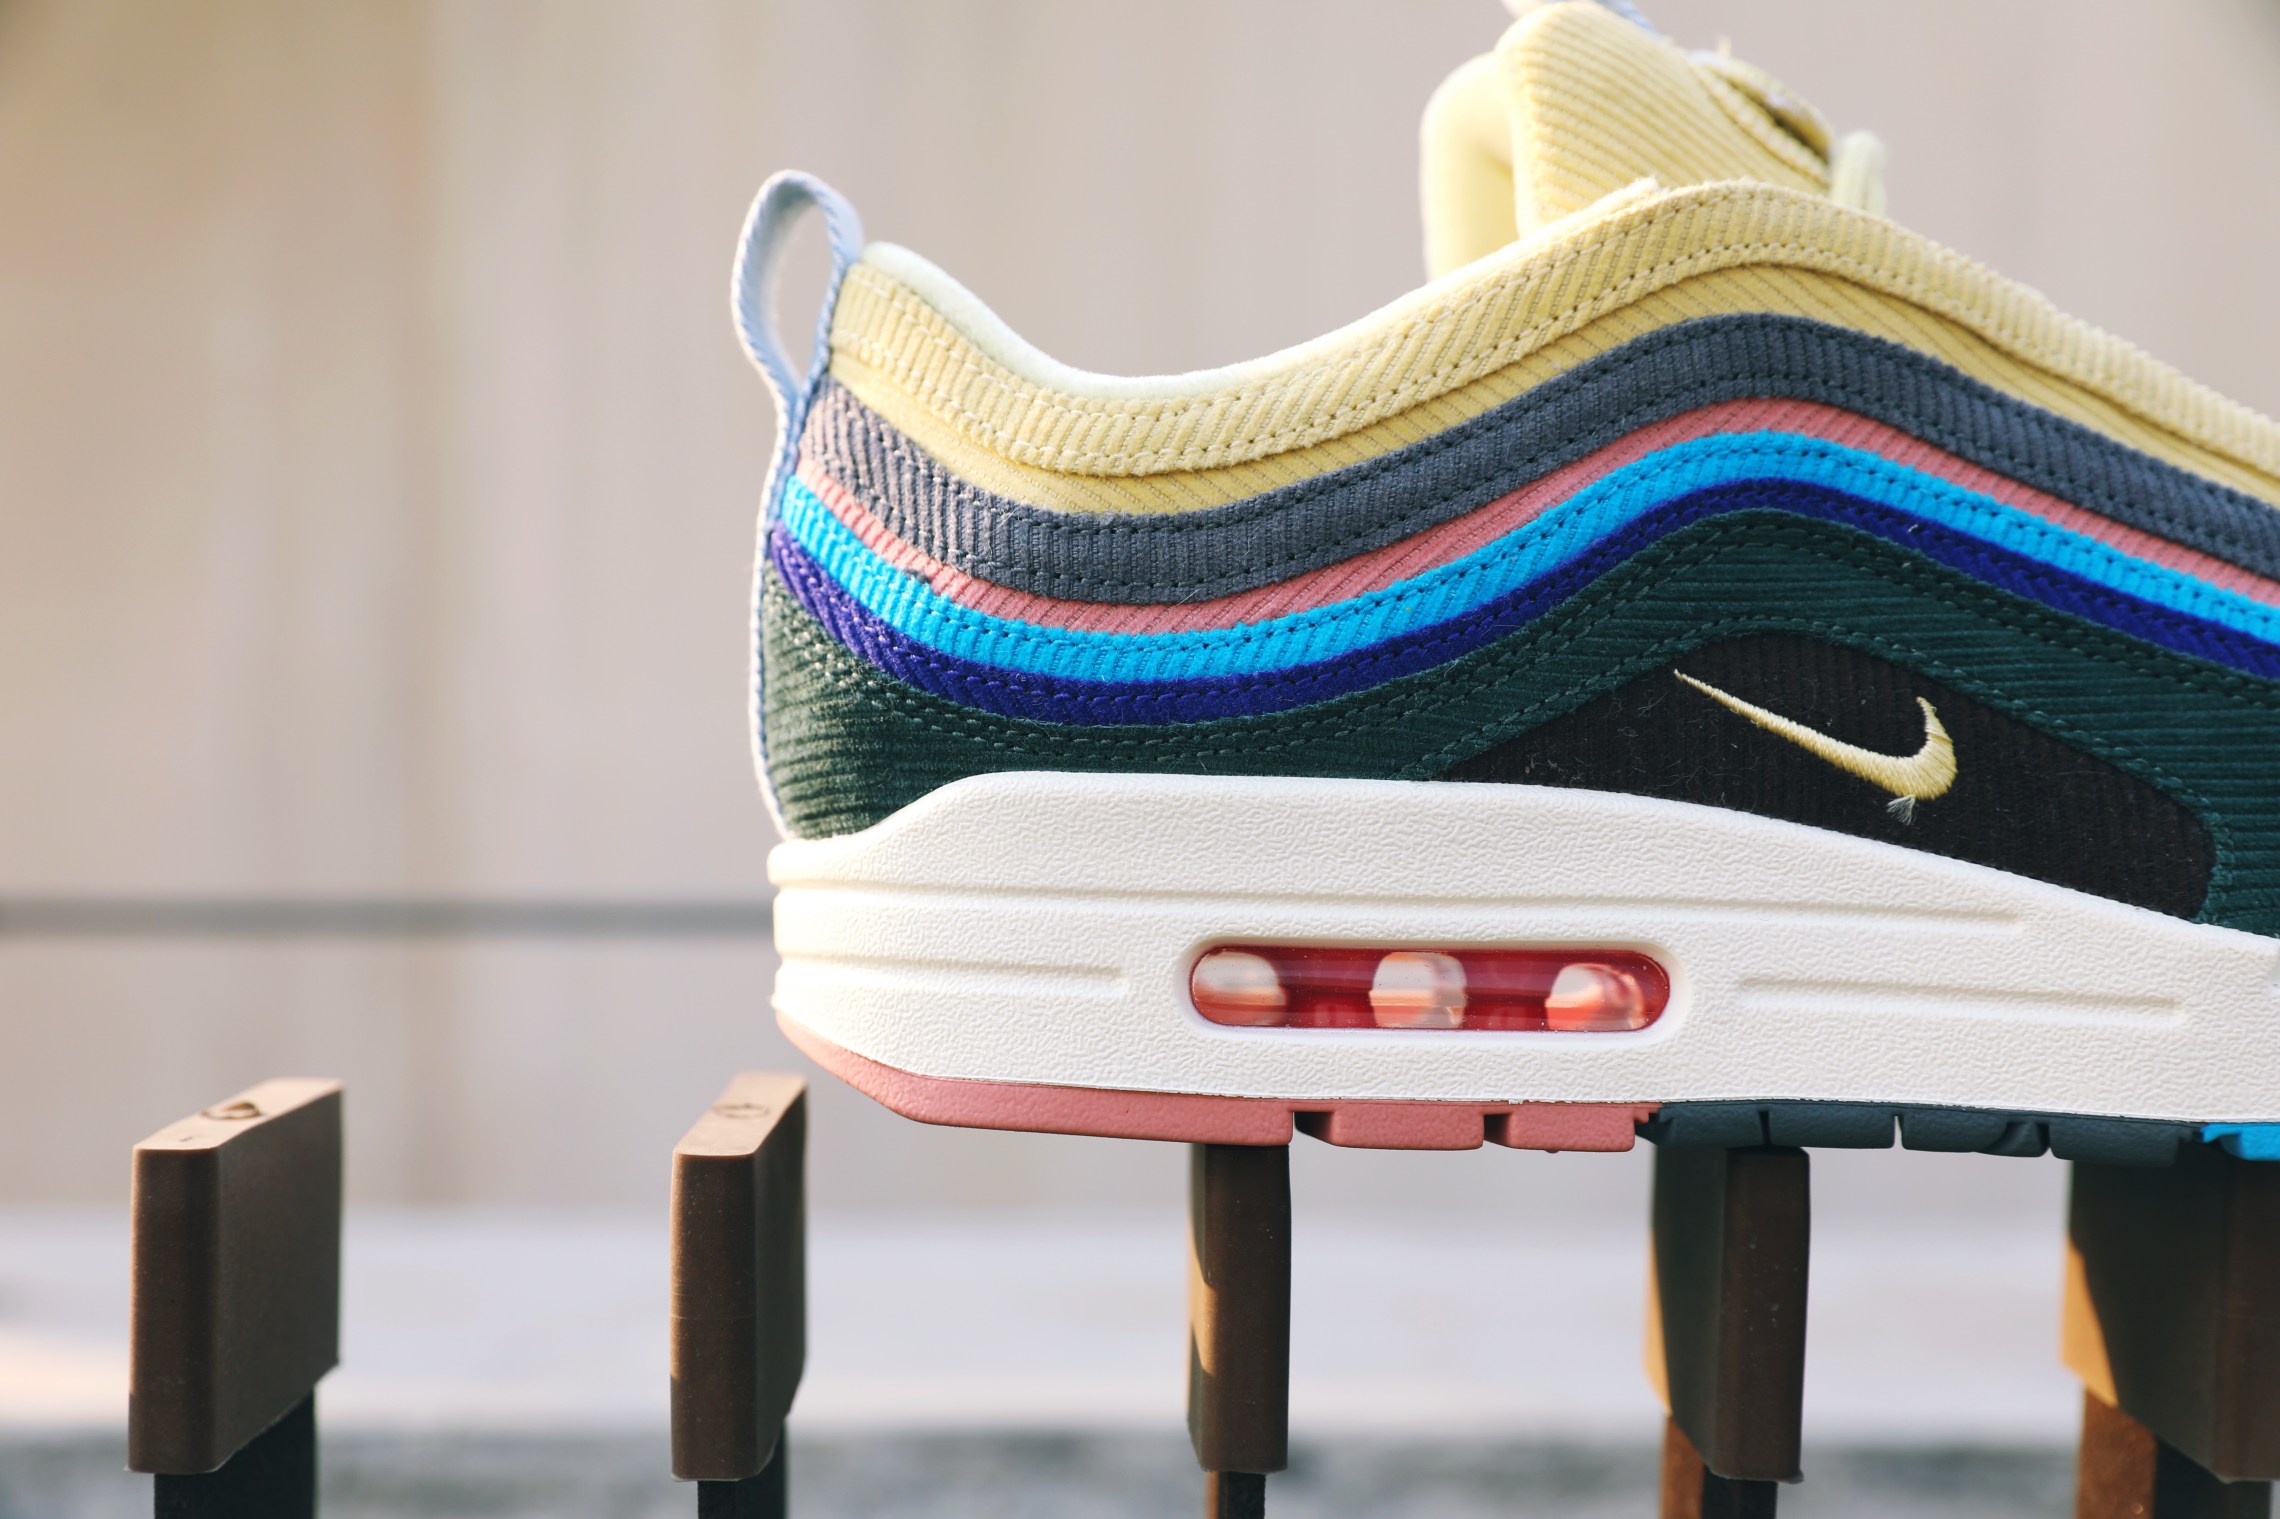 wotherspoon 2